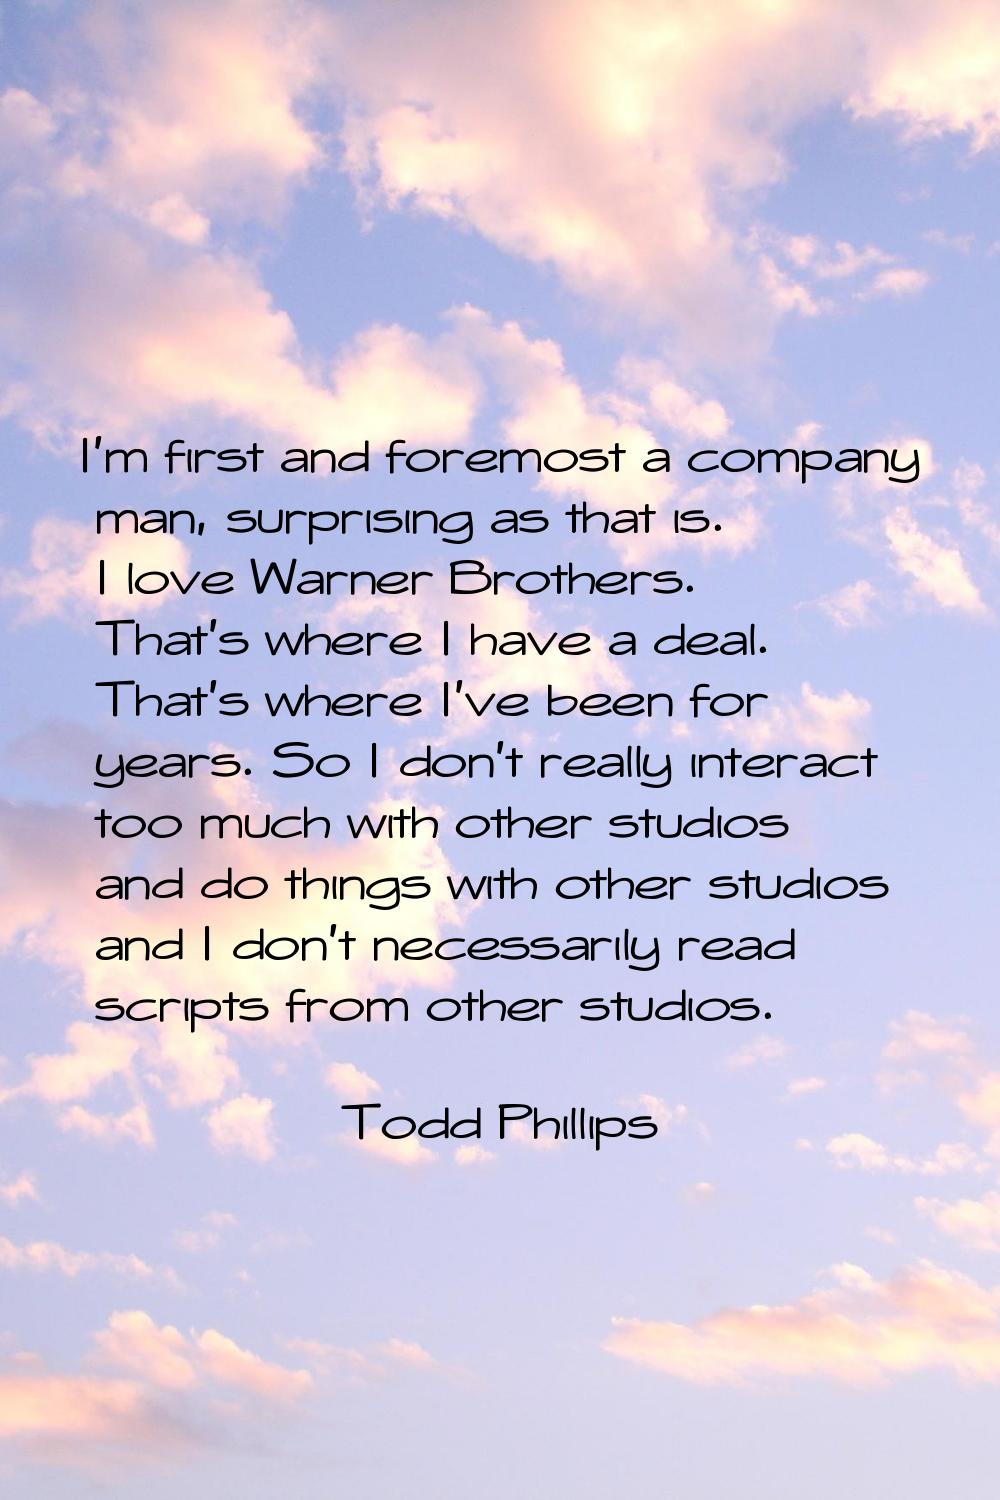 I'm first and foremost a company man, surprising as that is. I love Warner Brothers. That's where I